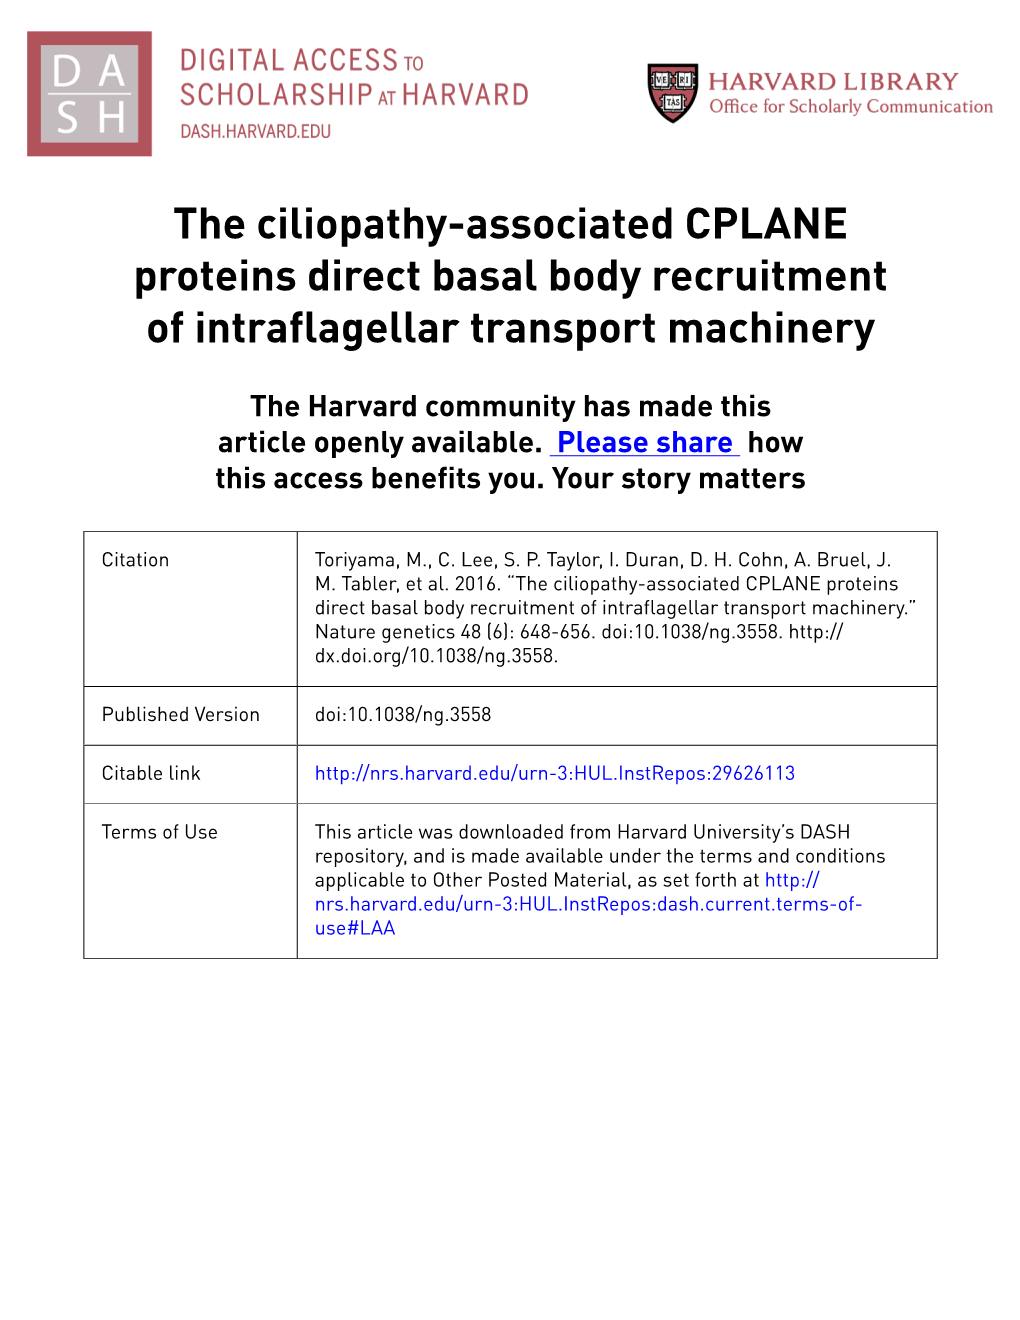 The Ciliopathy-Associated CPLANE Proteins Direct Basal Body Recruitment of Intraflagellar Transport Machinery